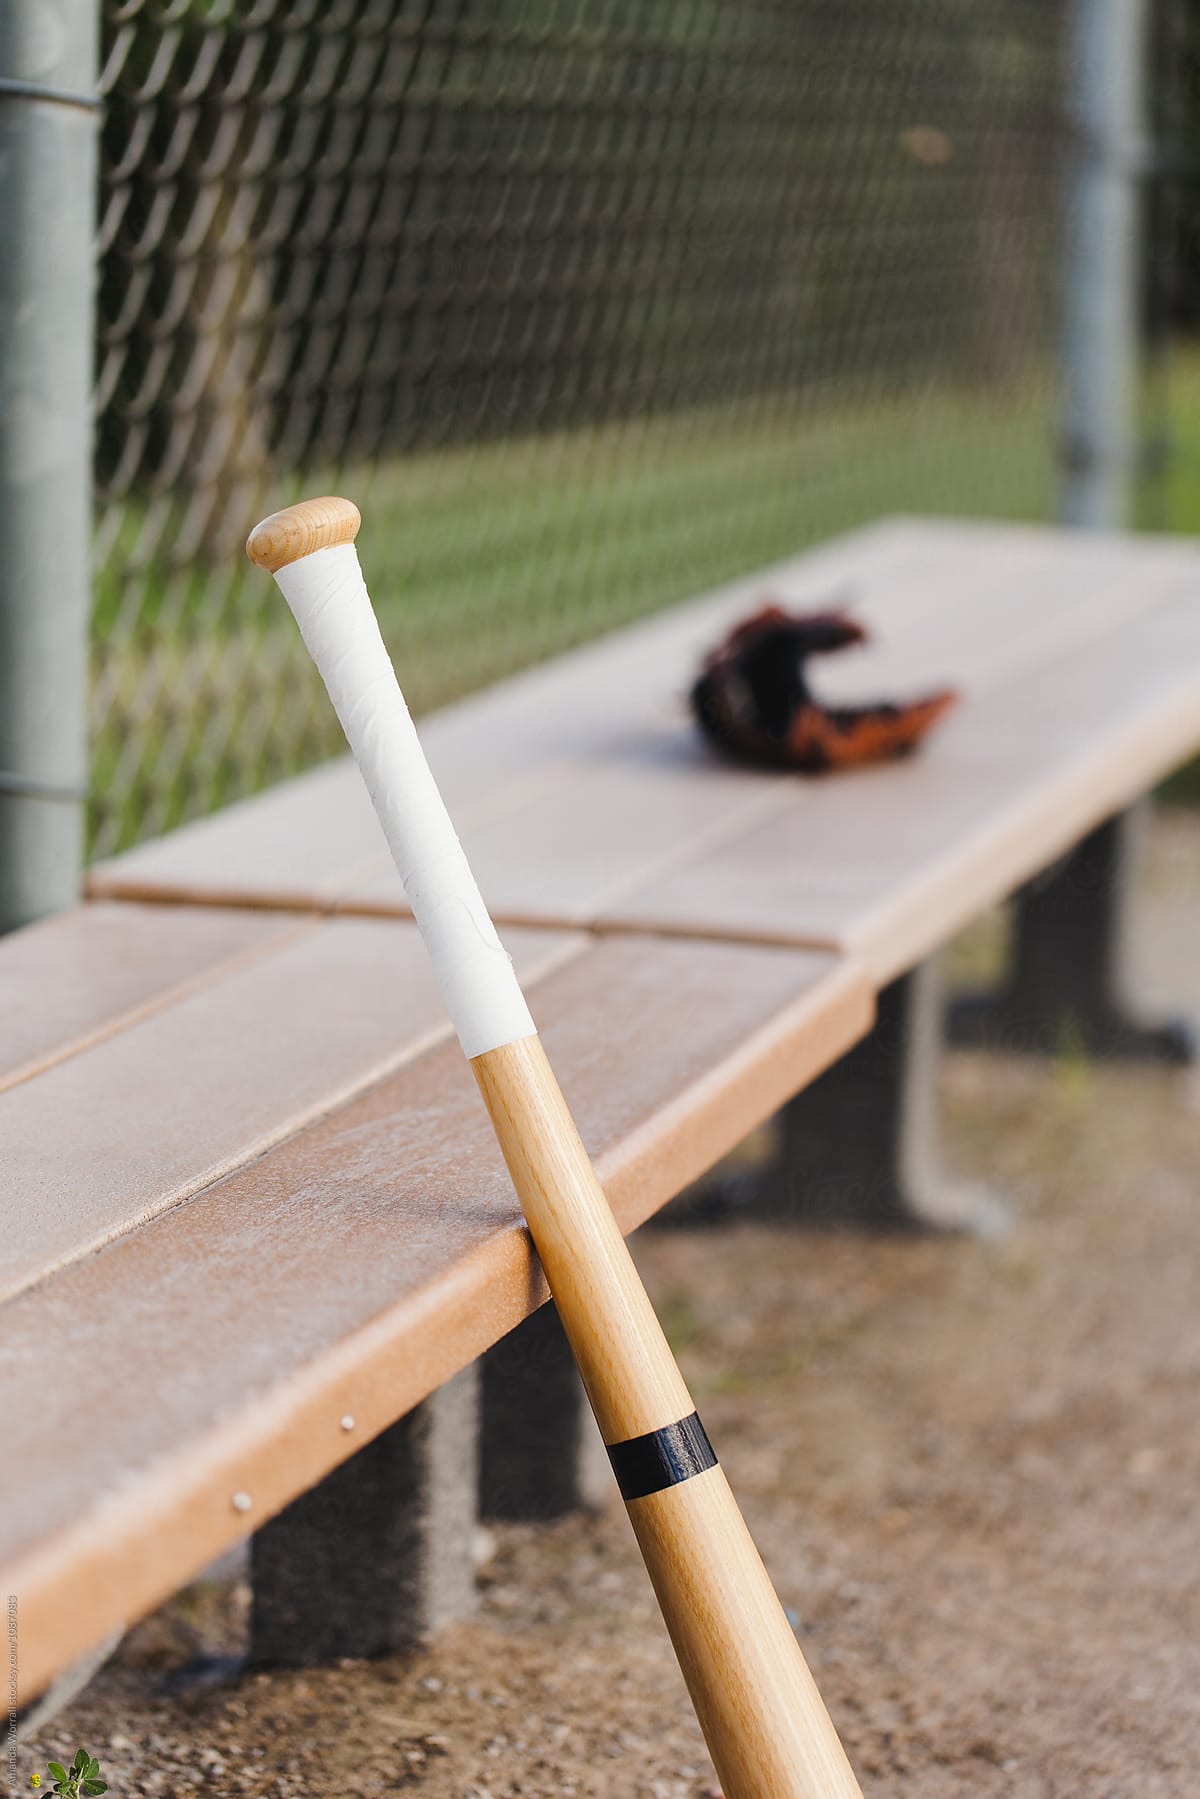 Baseball Bat Leaning Against The Dugout Bench By Amanda Worrall